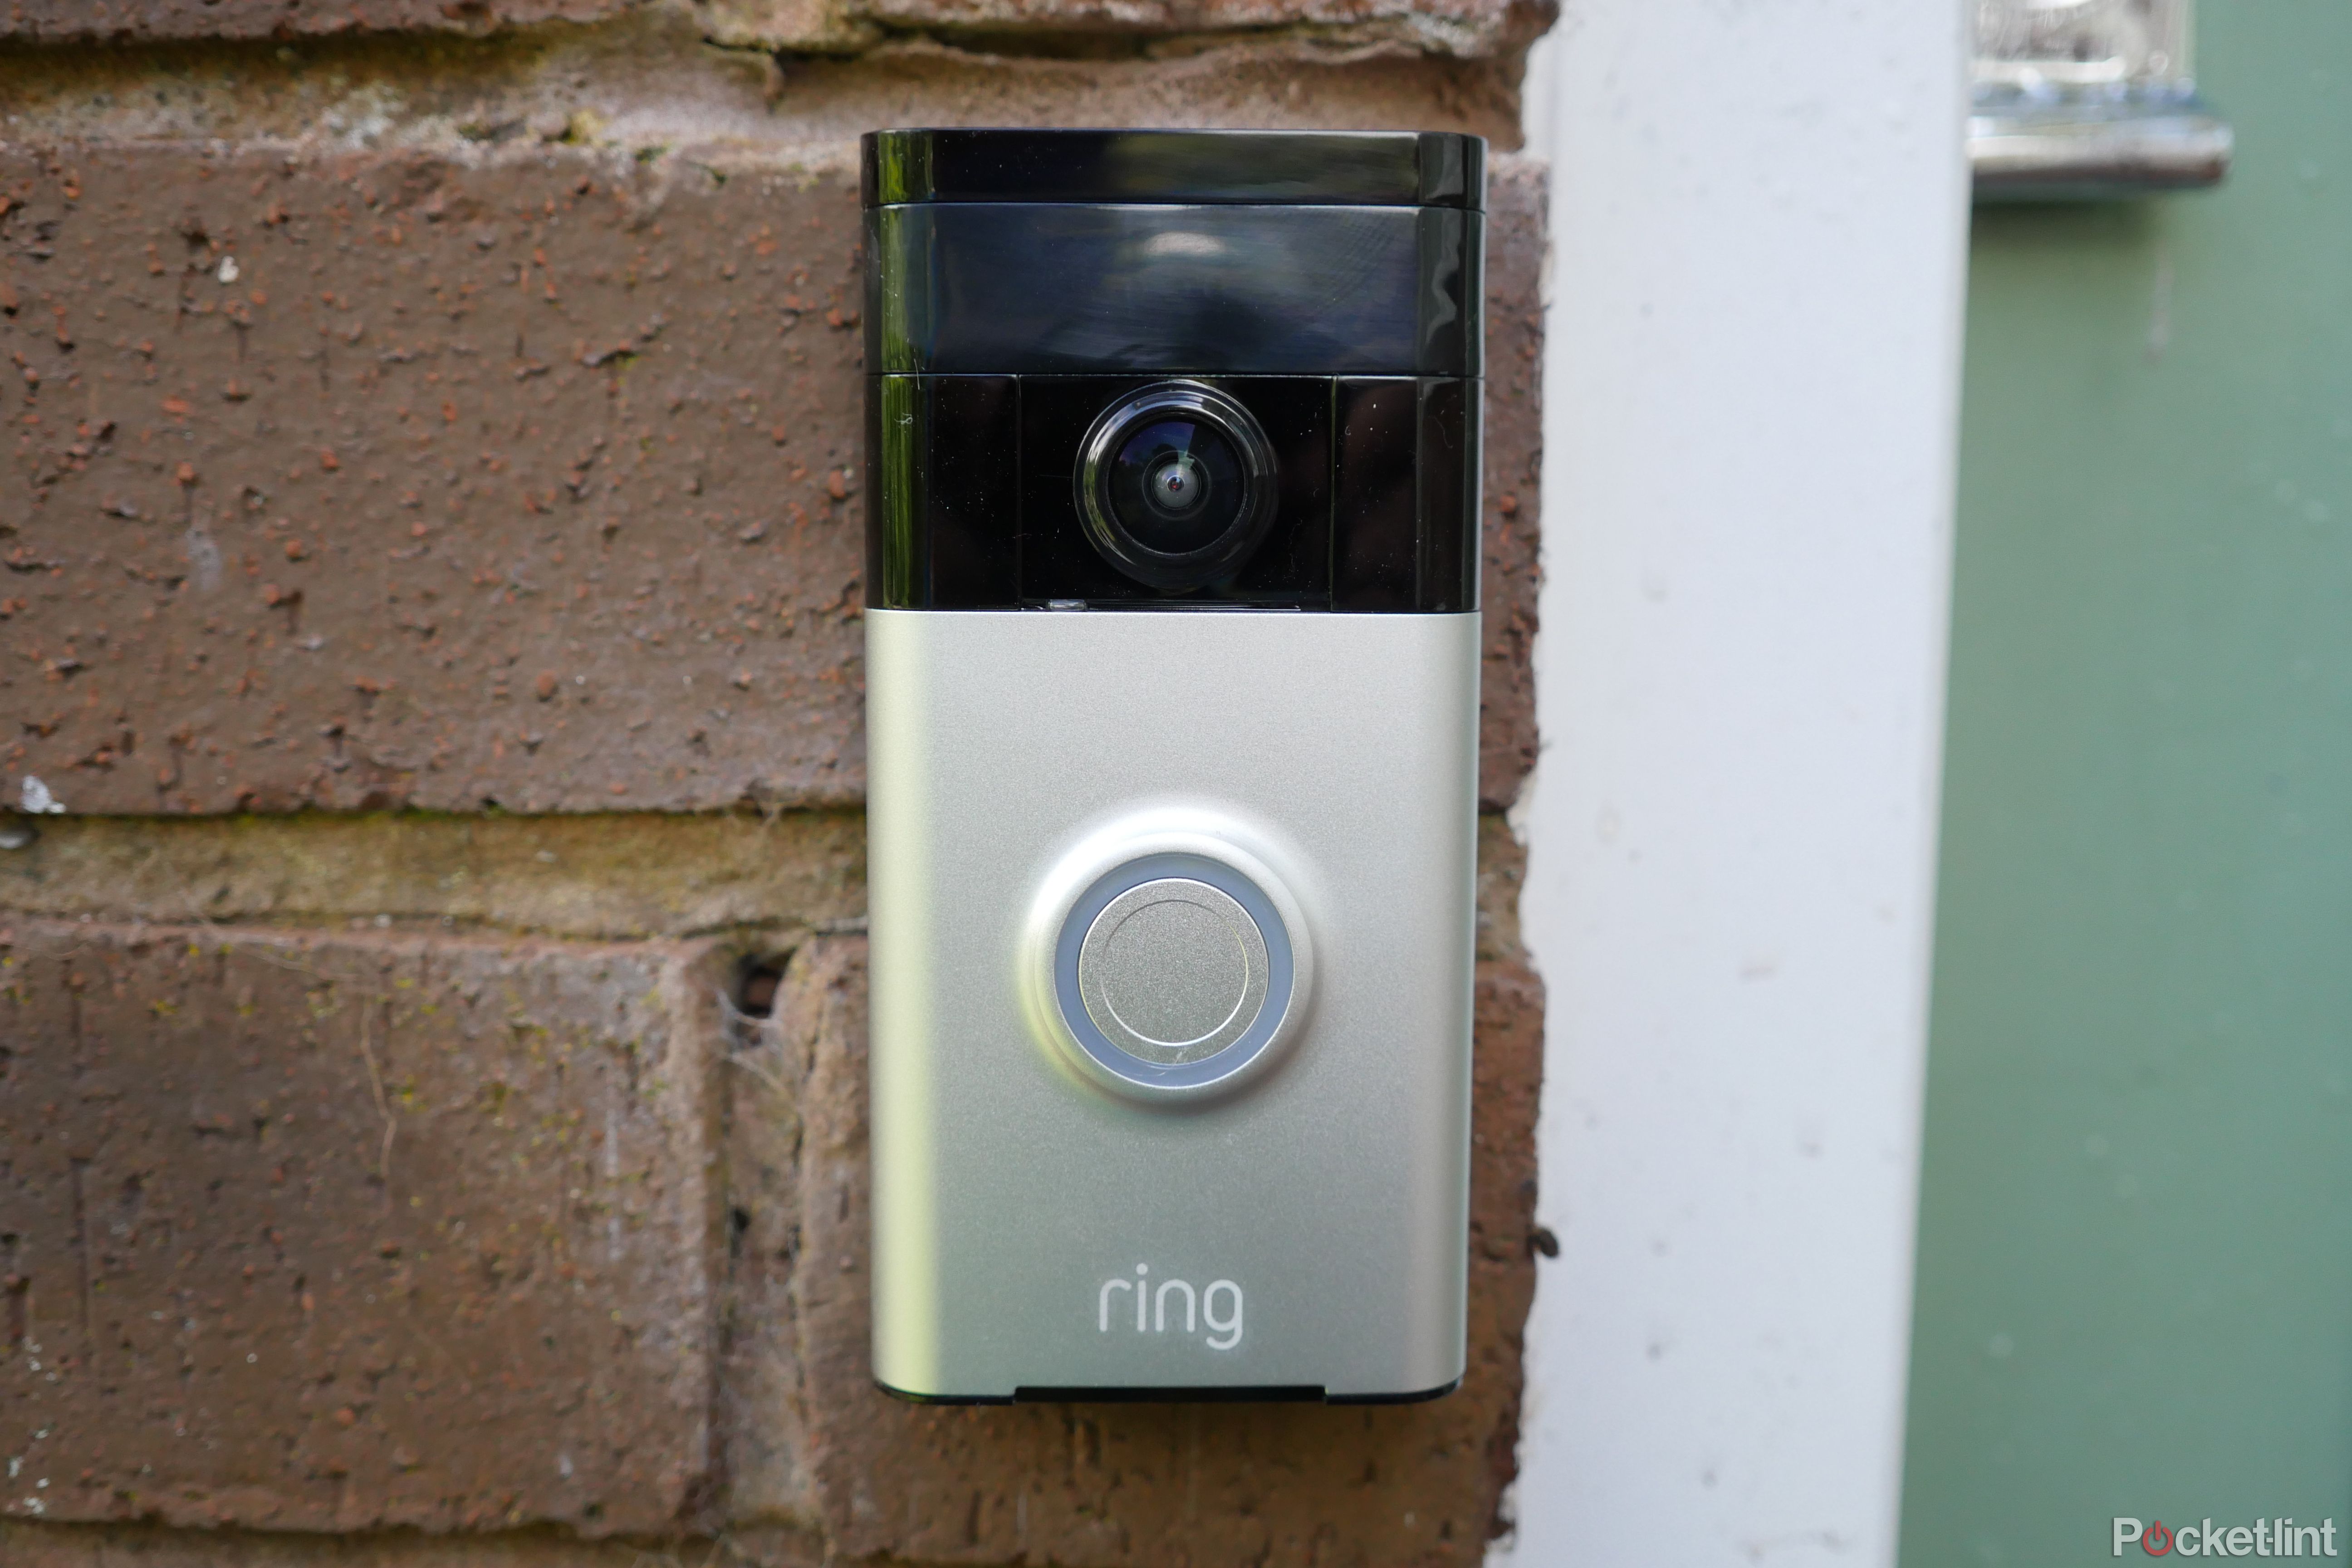 Amazon slashes price of Ring Video Doorbell now that it owns Ring image 1